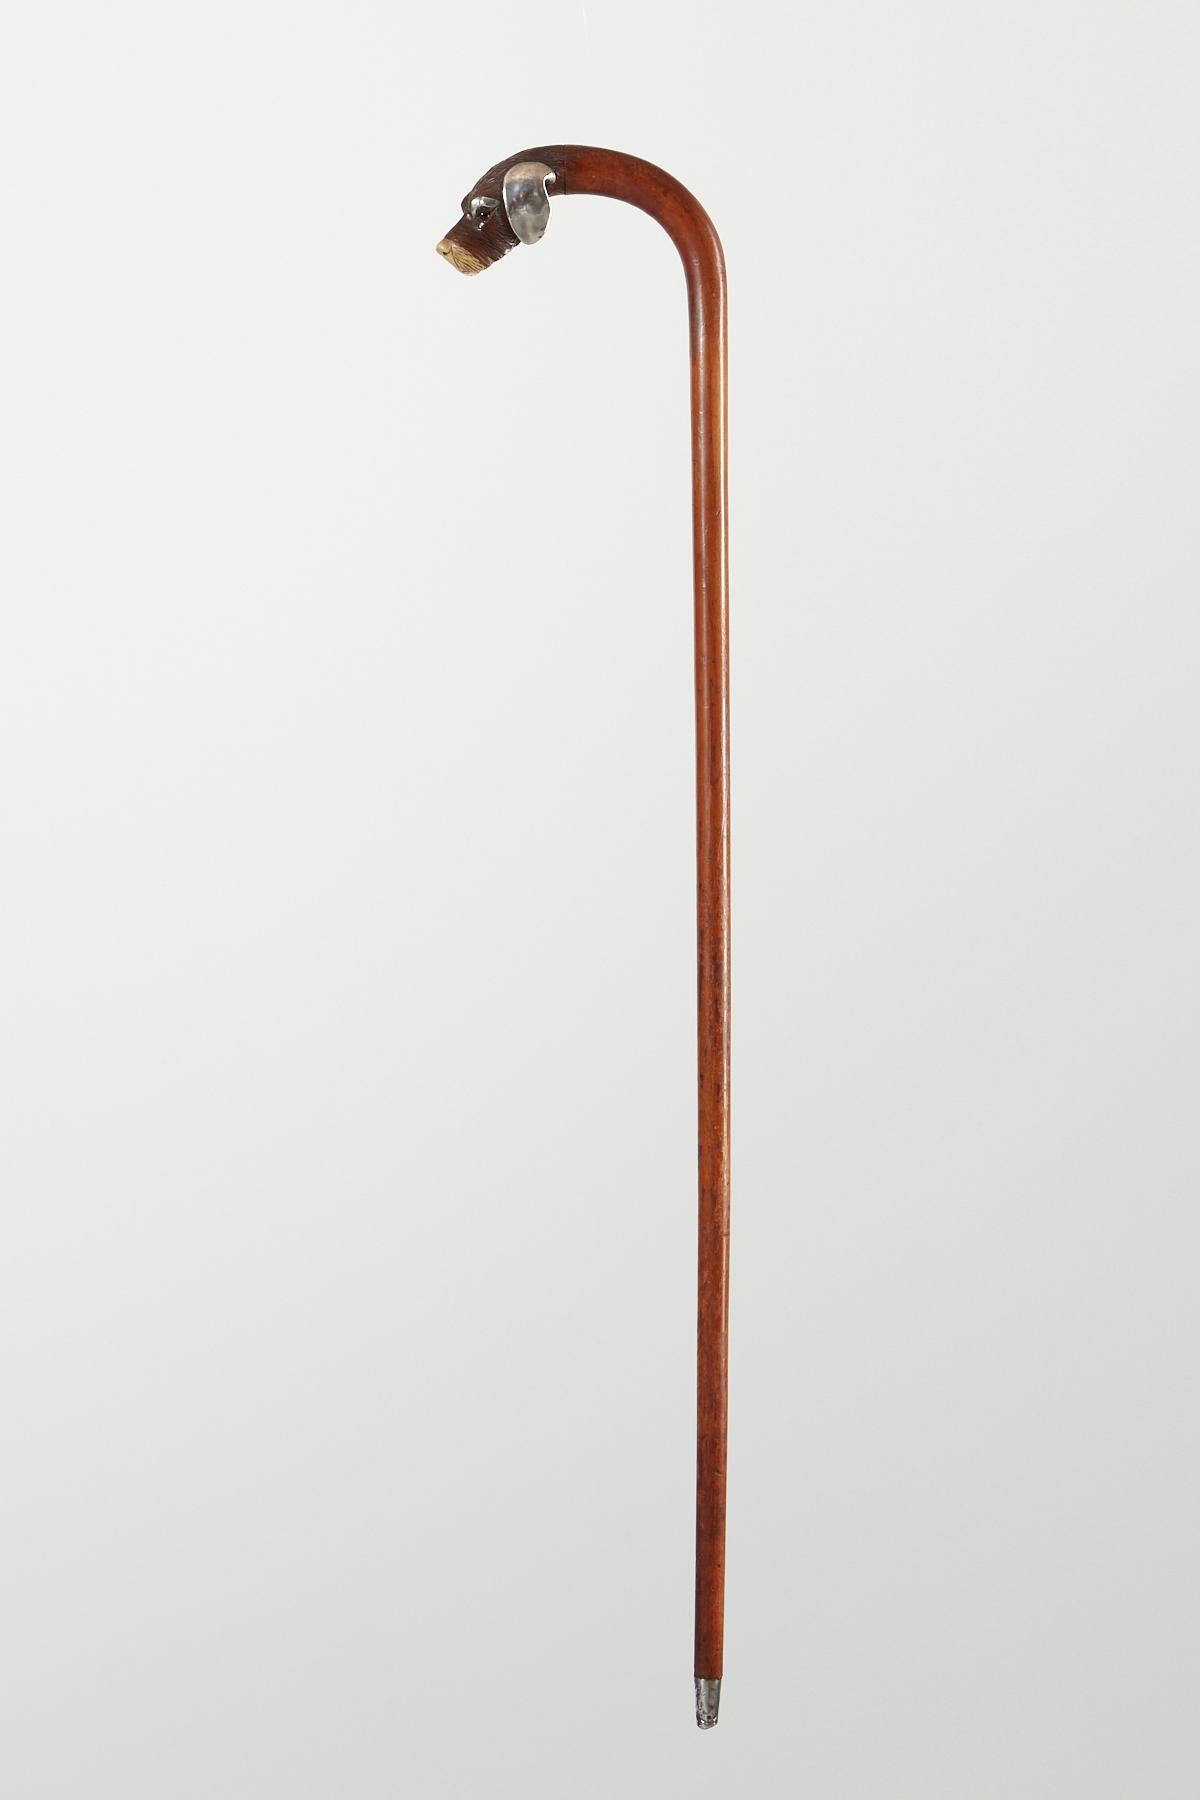  Presenting an antique walking stick with a carved dog head and silver detailing, hailing from France around 1900.

This unique walking stick is a rare find. The dog's head is intricately carved, featuring silver ears and eyebrows. 
Impressively,